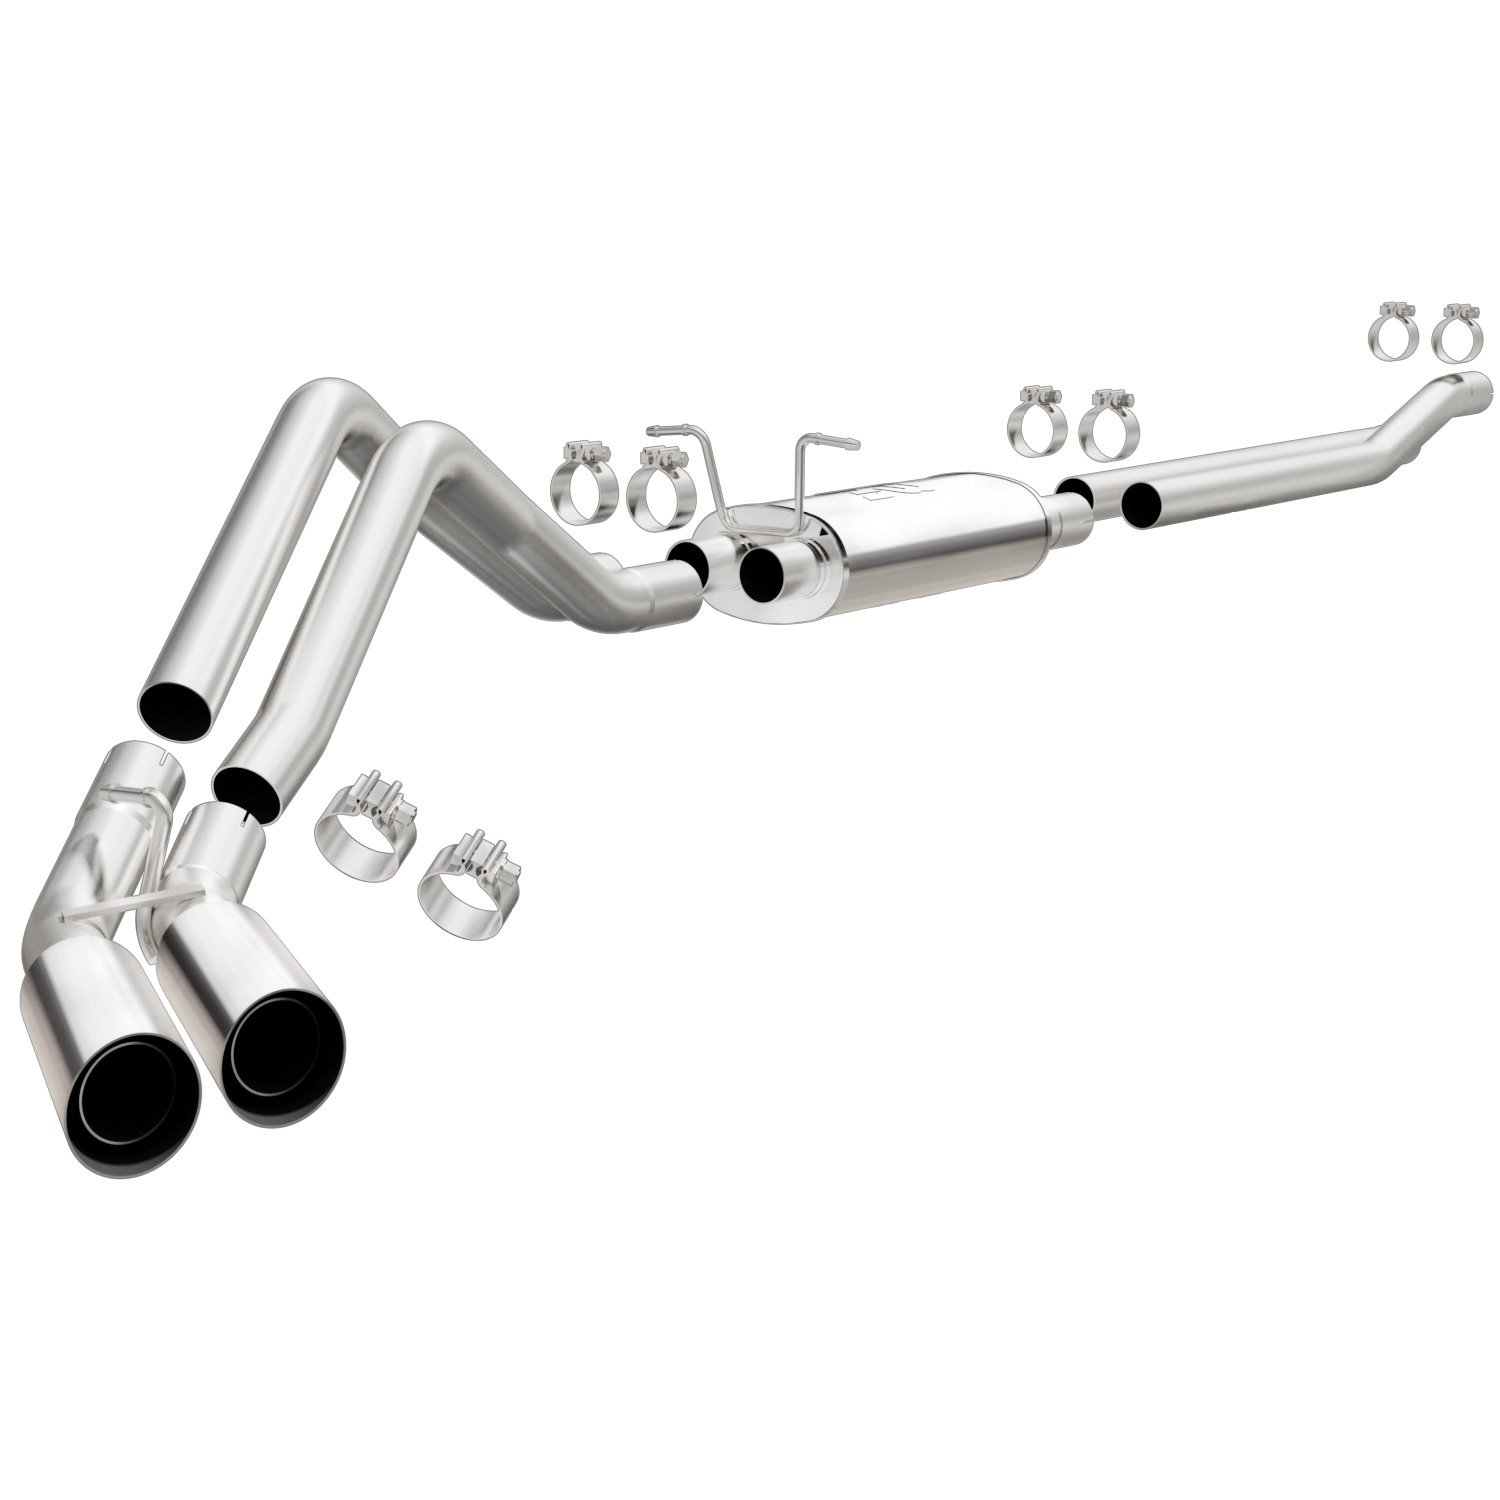 Ford truck dual exhaust kits #10